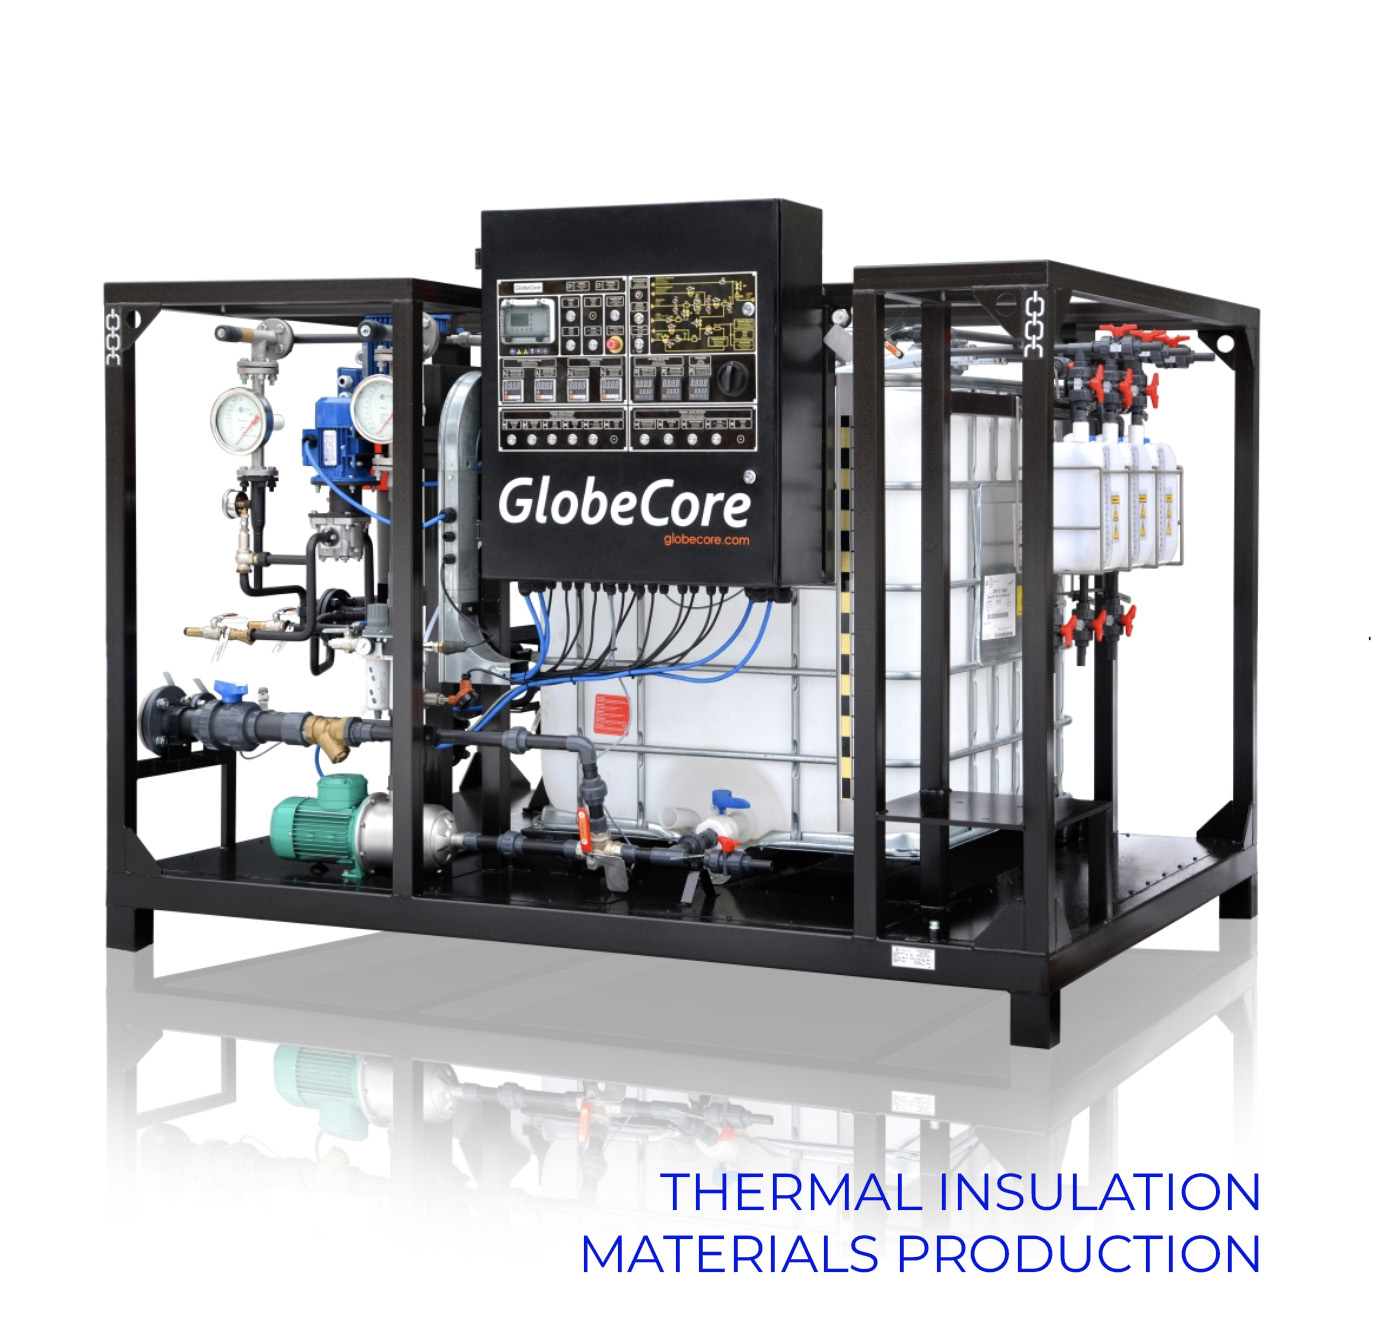 Thermal insulation materials production